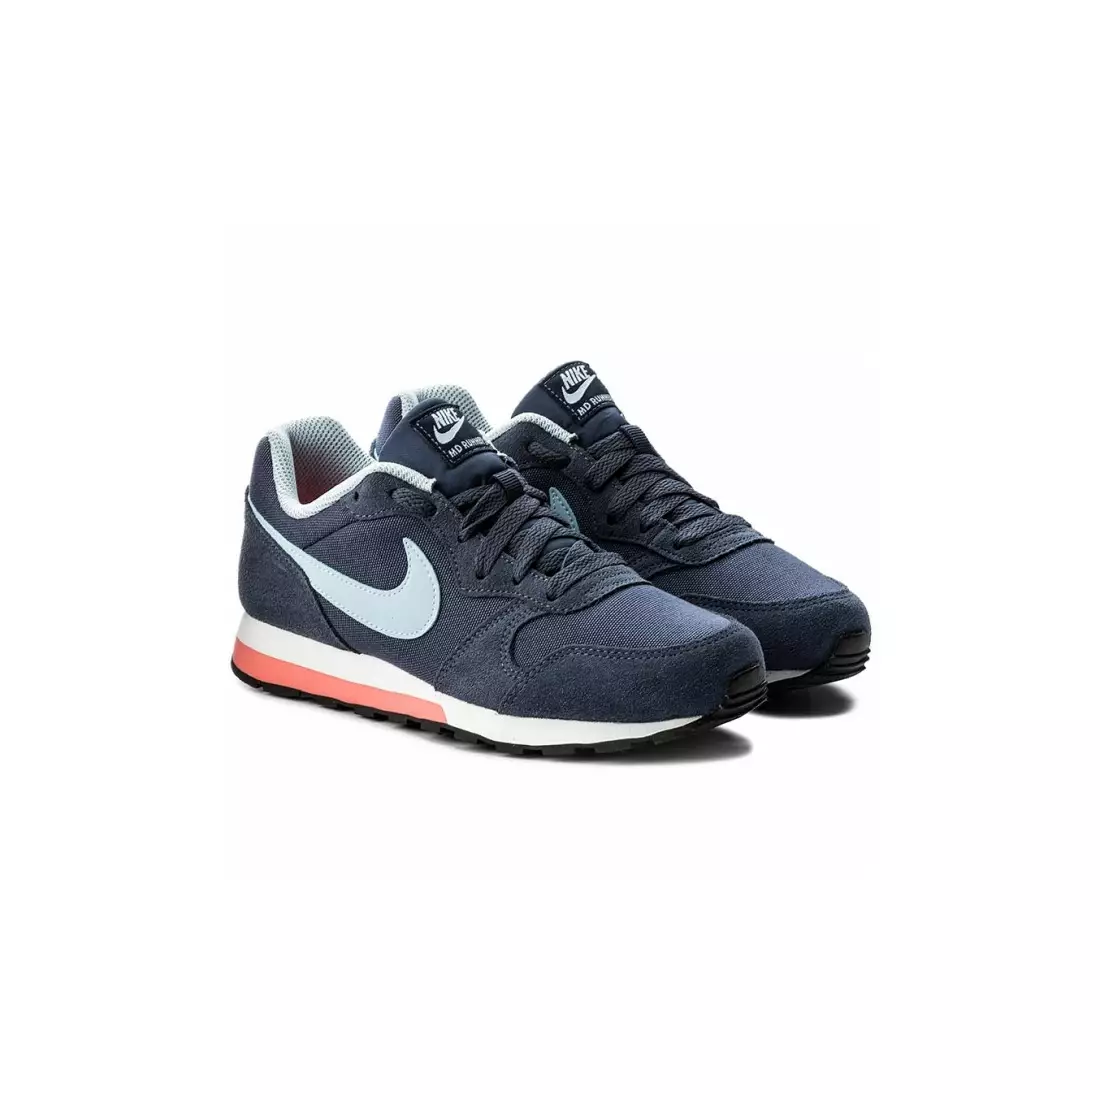 NIKE Md Runner 2 GS 807319-405 - women's sports shoes, color: navy